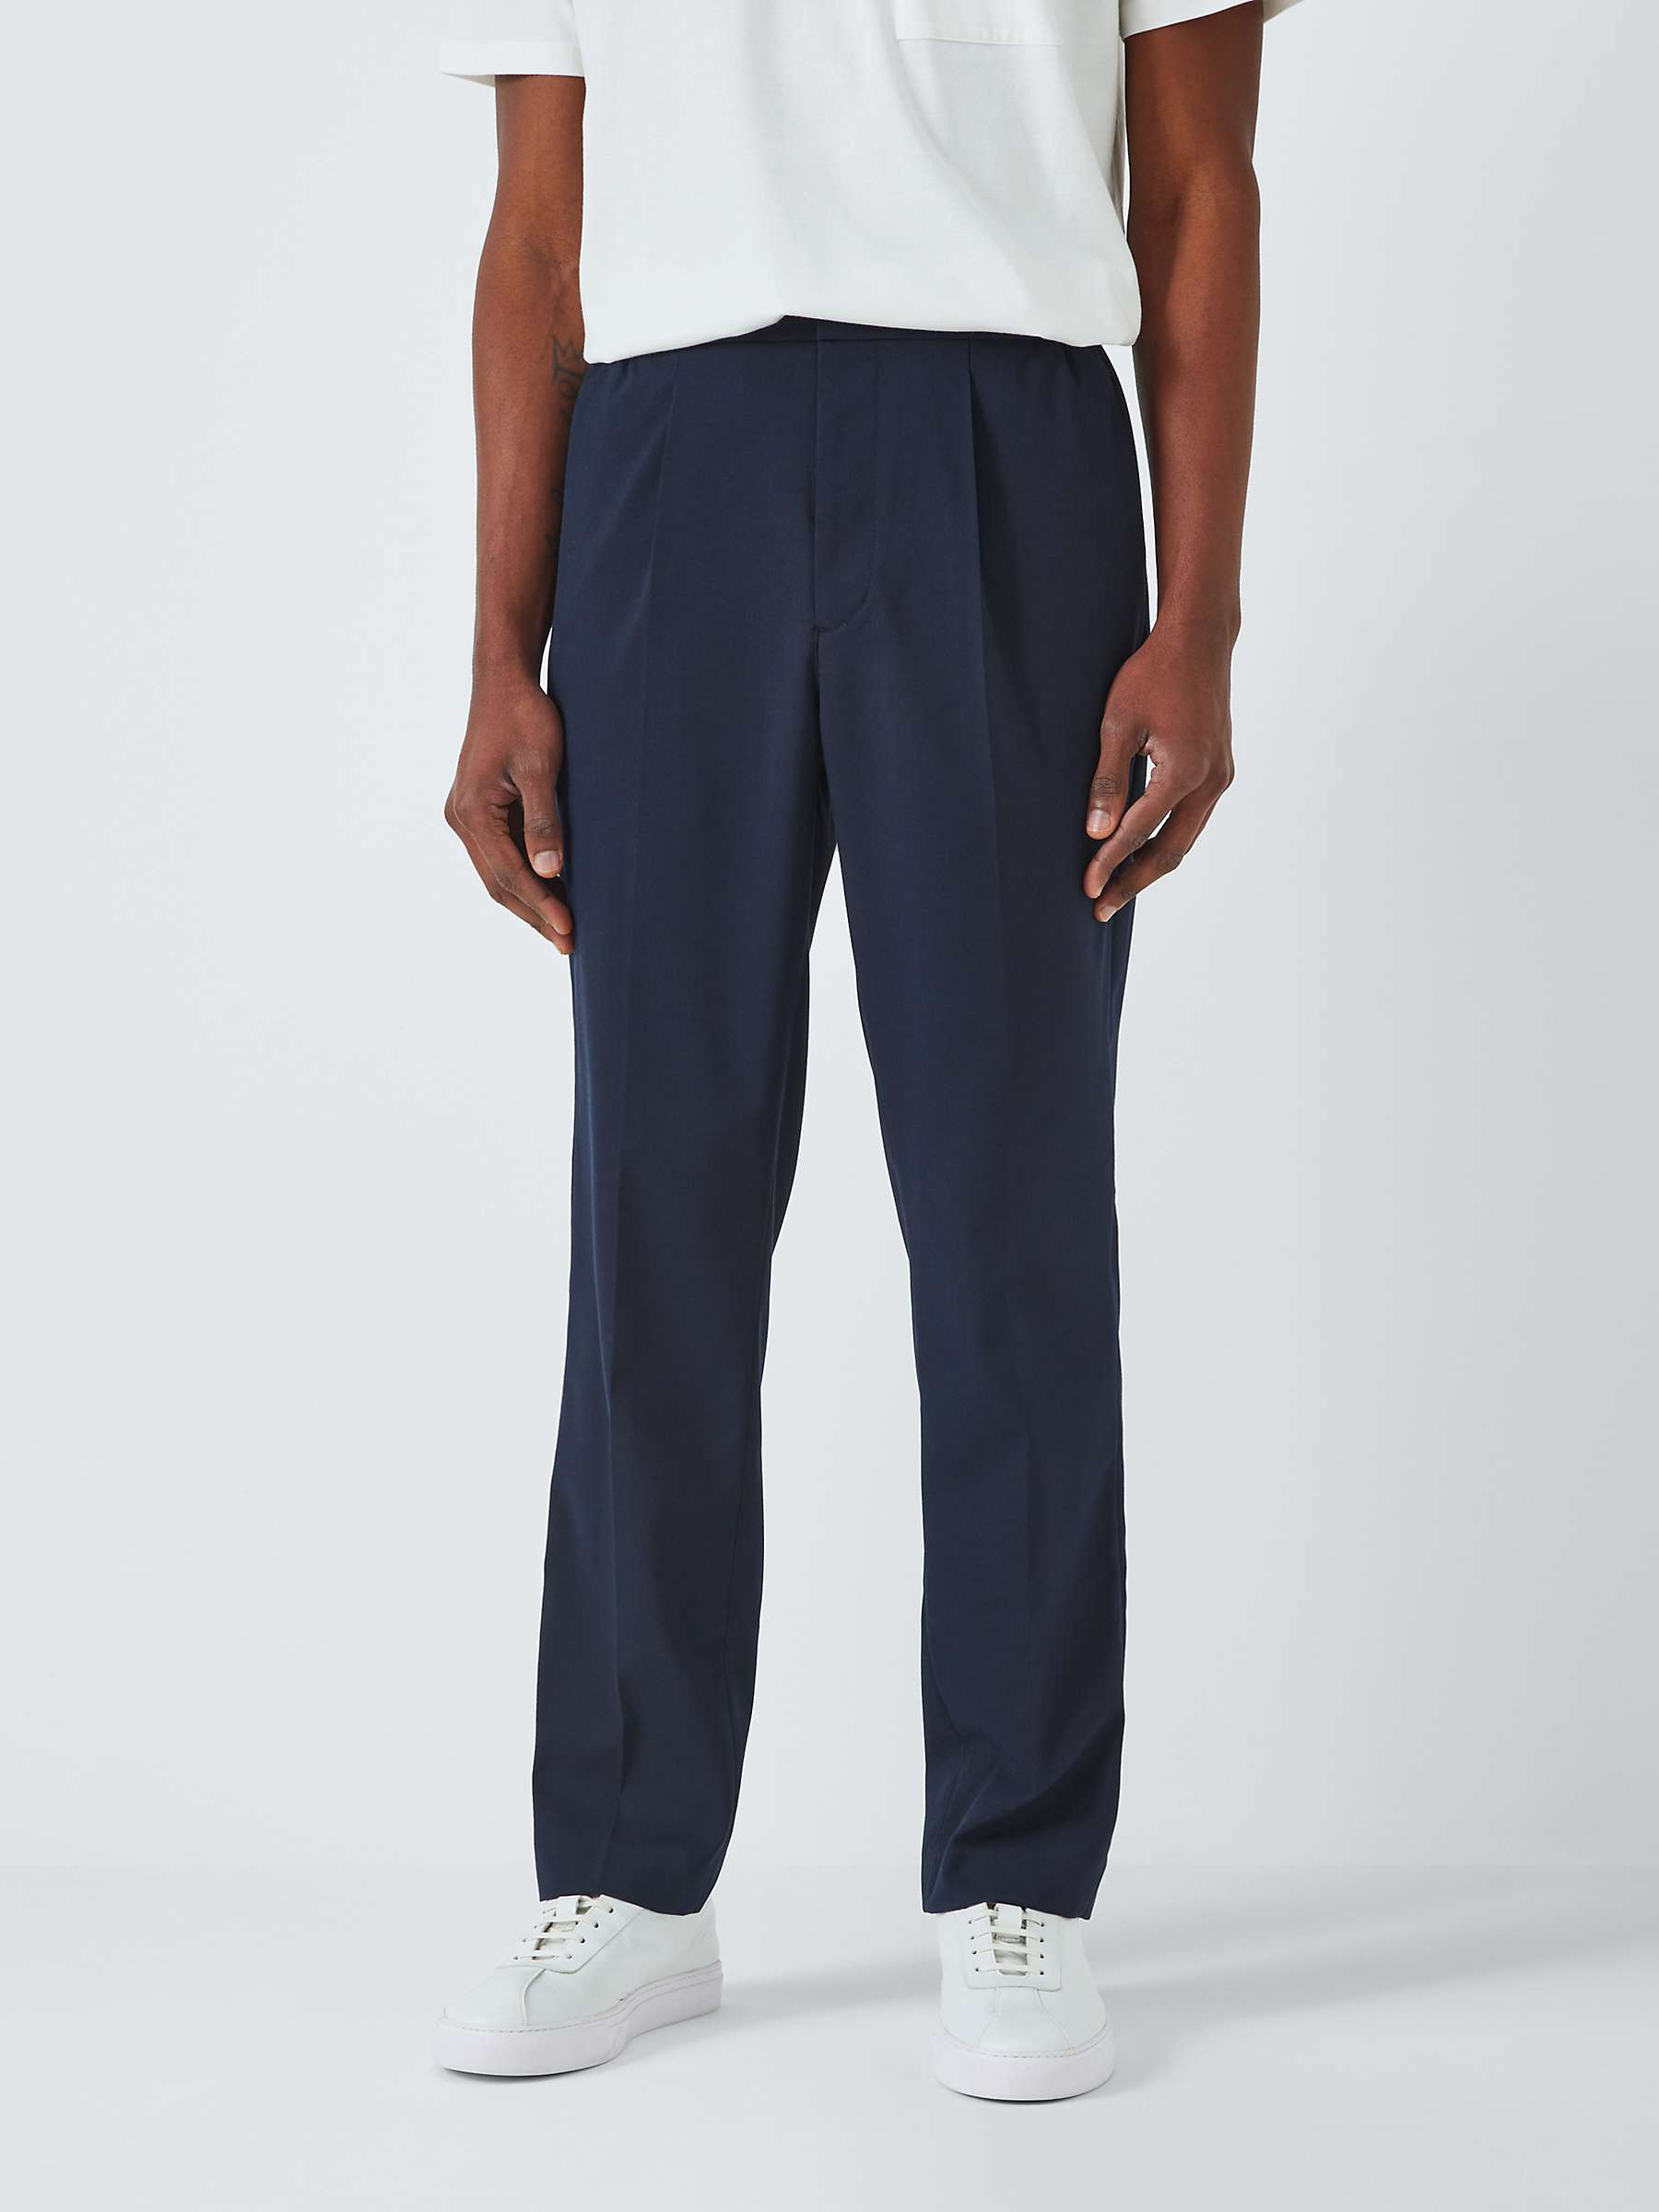 Buy Kin Pleated Trousers Online at johnlewis.com